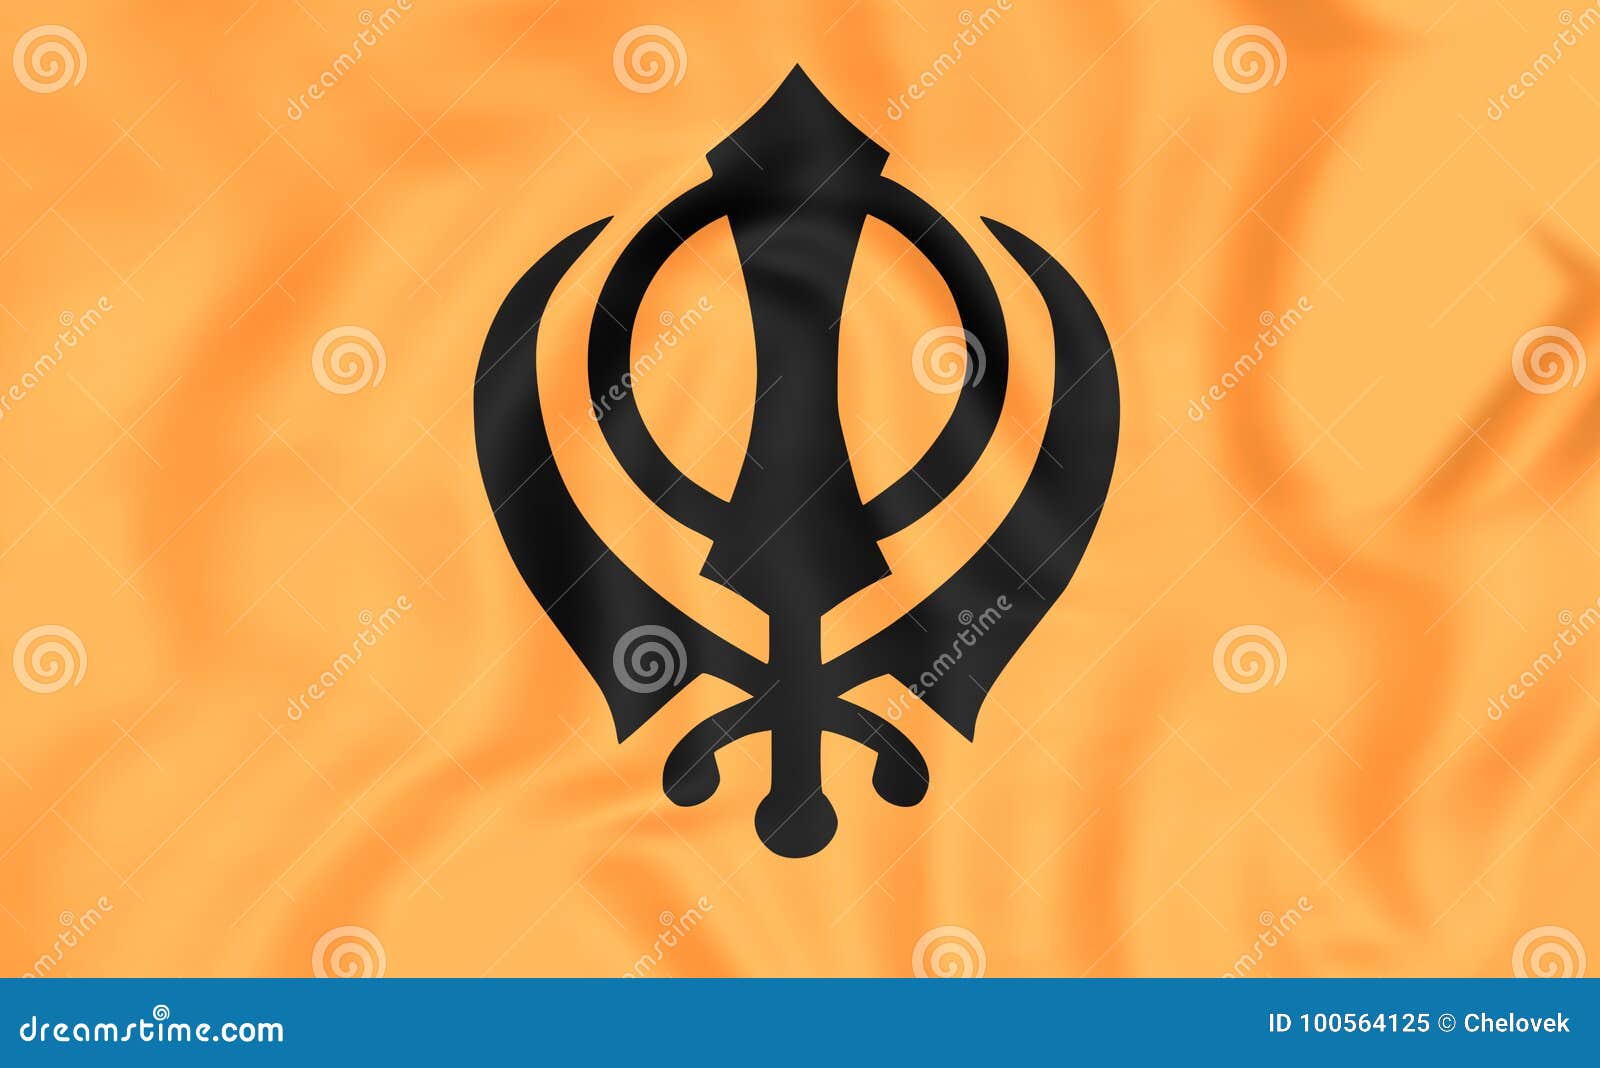 Khanda tattoo Cut Out Stock Images & Pictures - Alamy